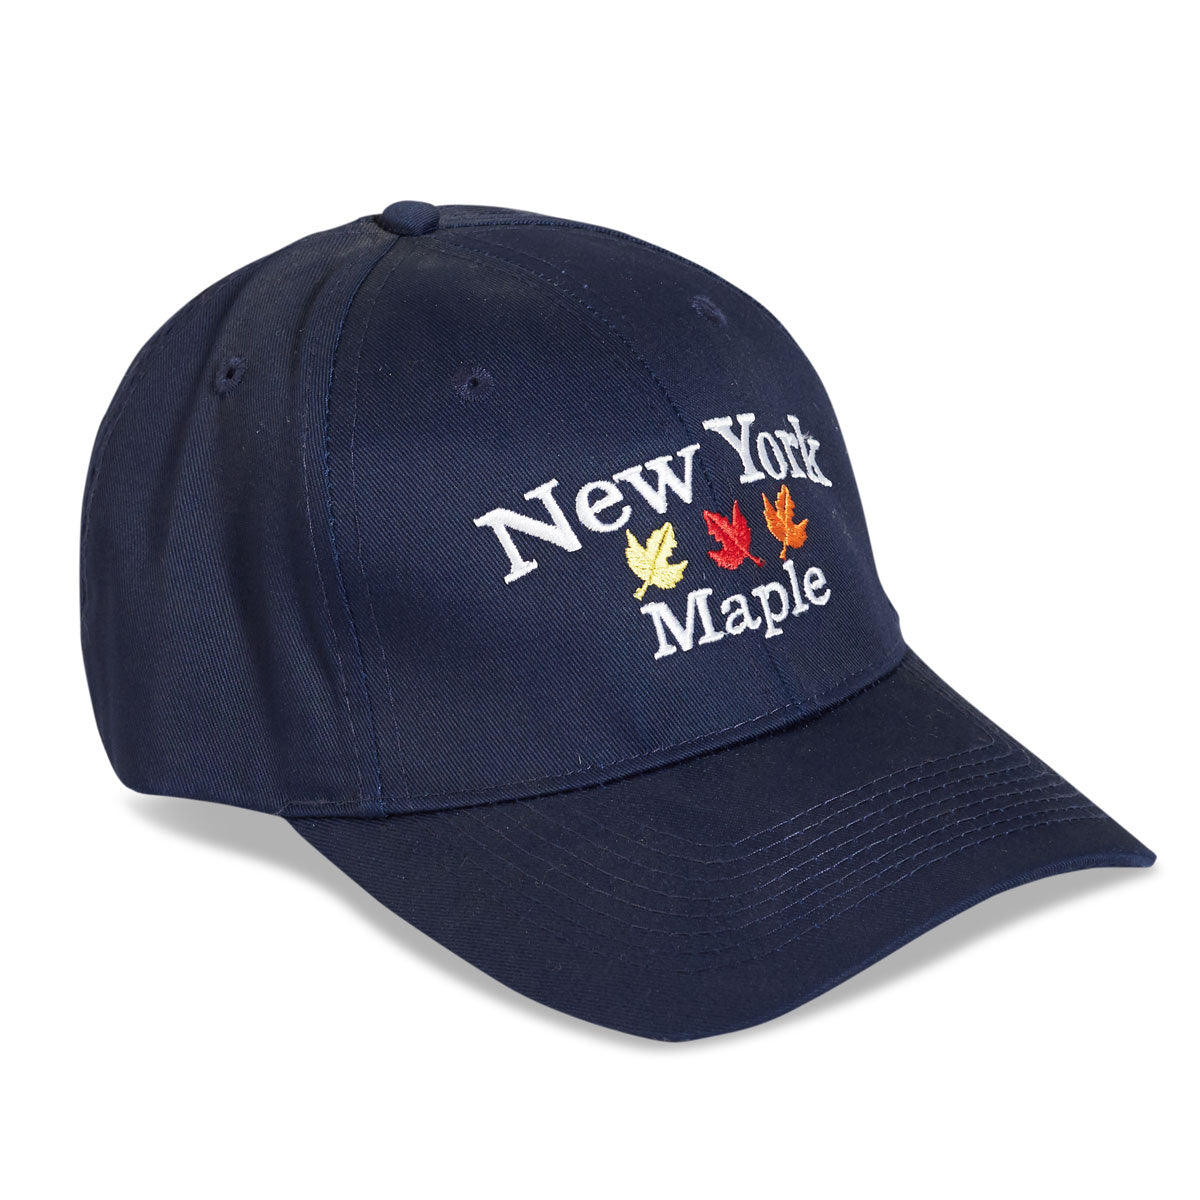 New York Maple Hat - 2 Colors